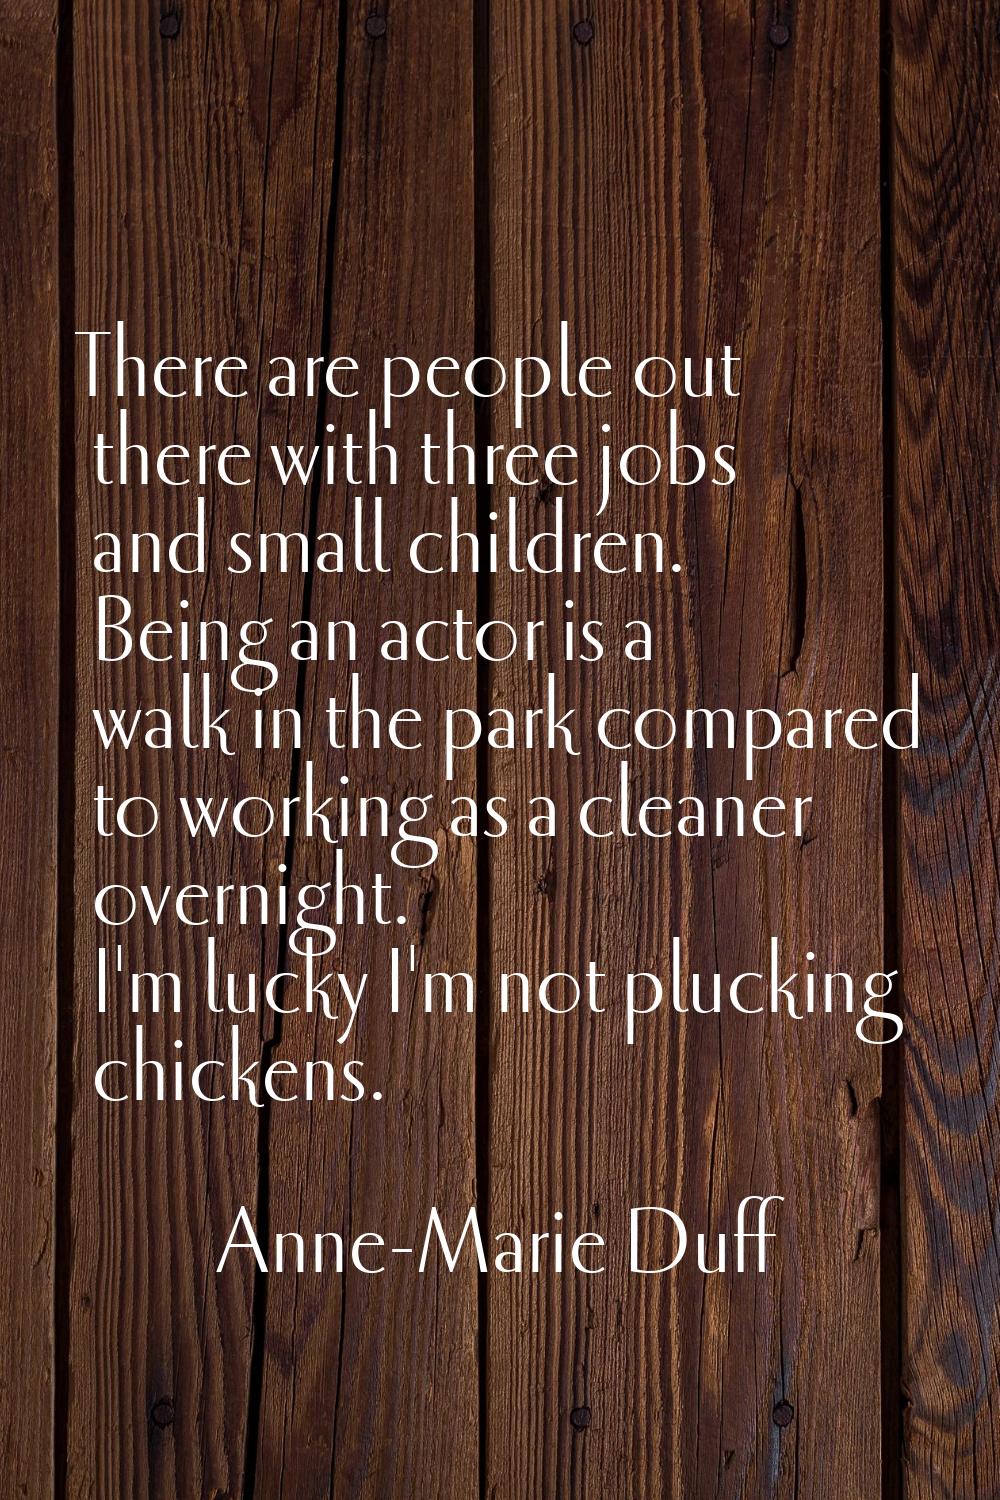 There are people out there with three jobs and small children. Being an actor is a walk in the park